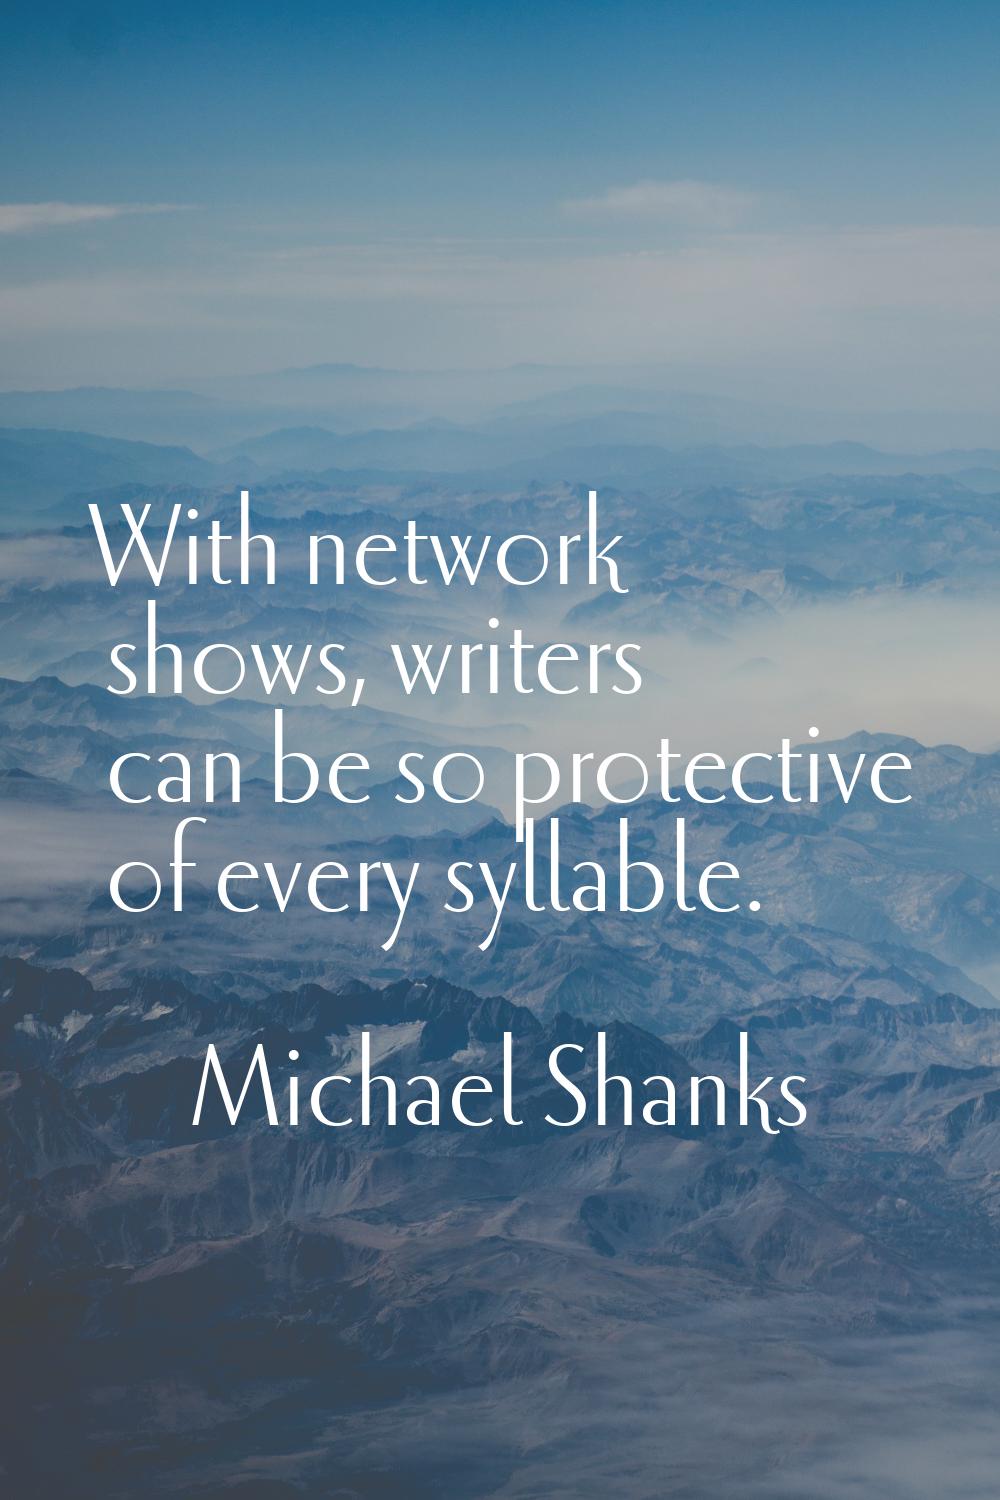 With network shows, writers can be so protective of every syllable.